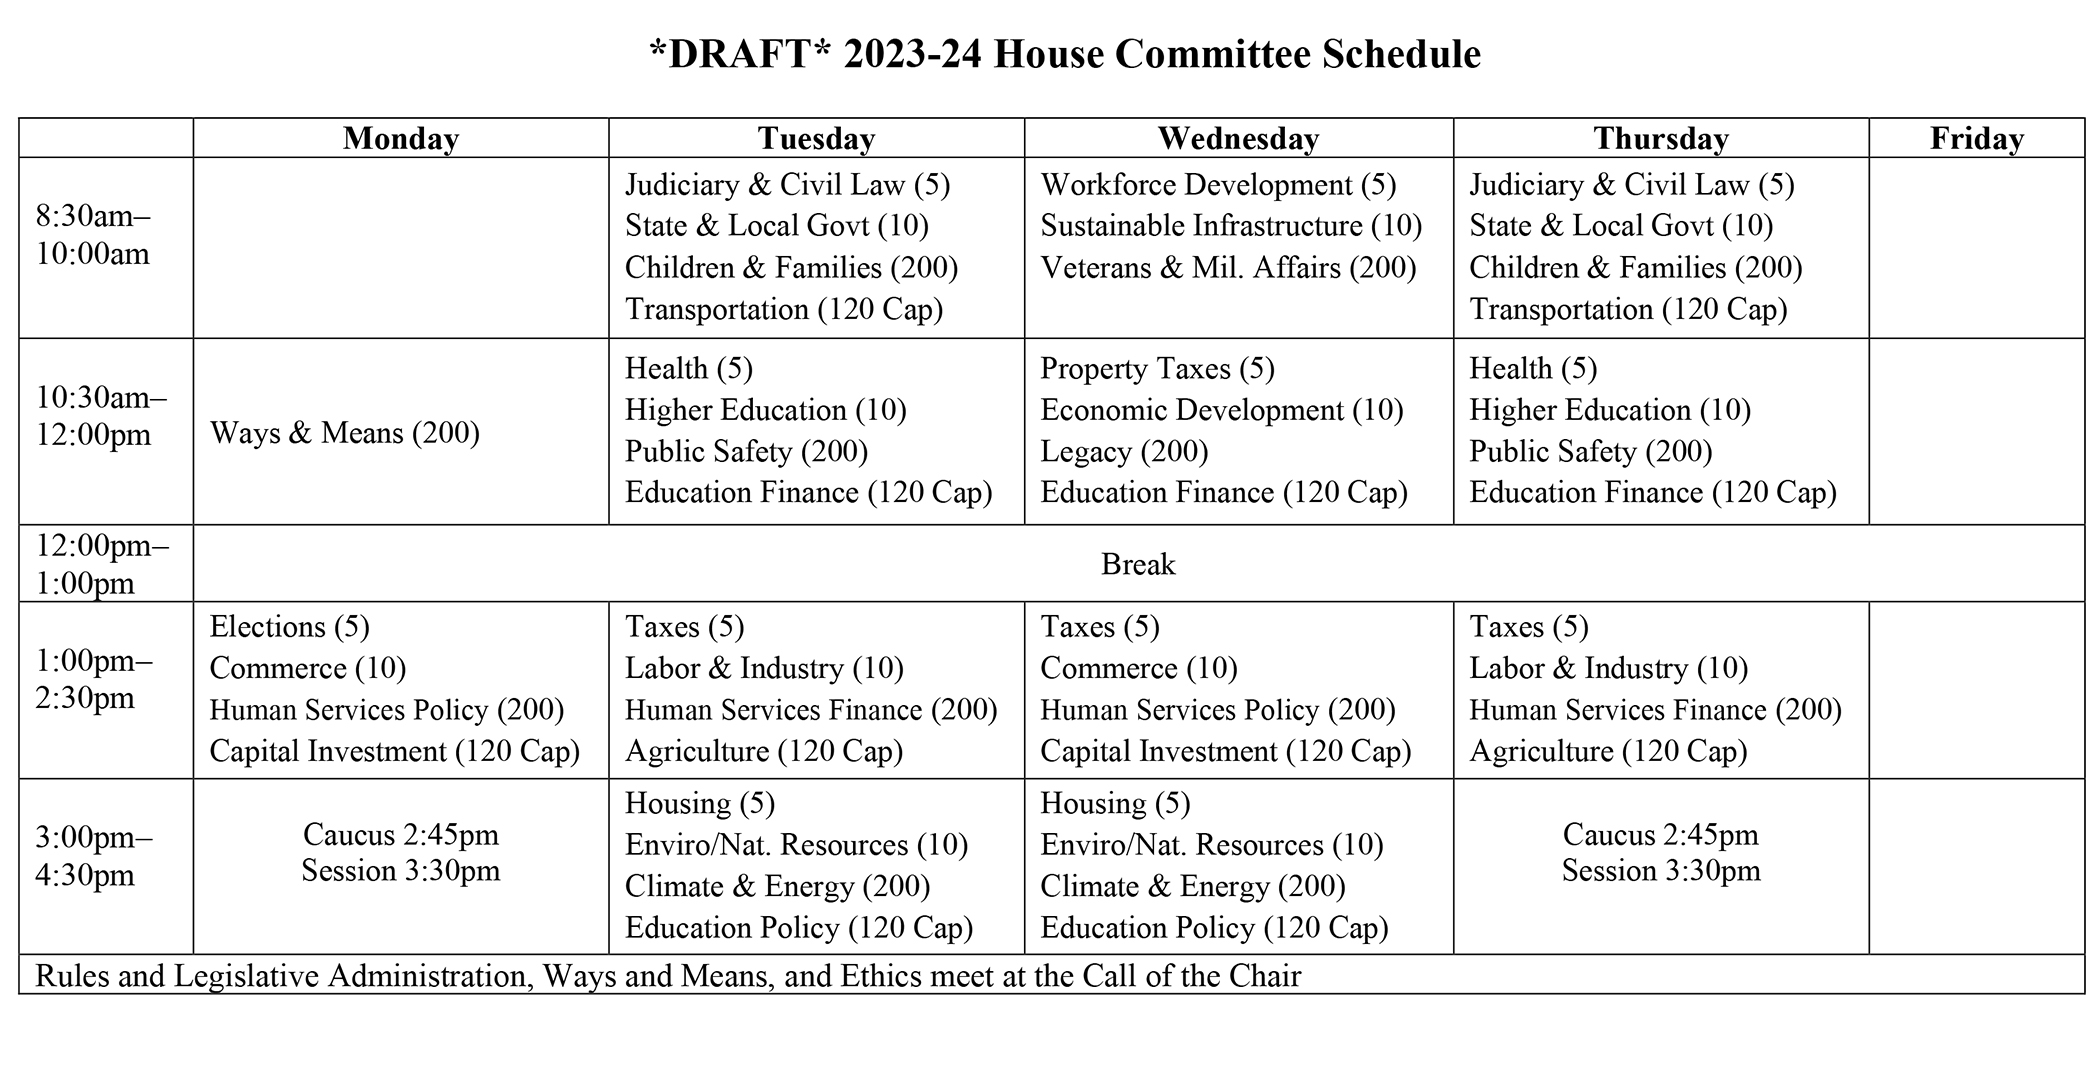 Draft House Committee Schedule for 2023-24